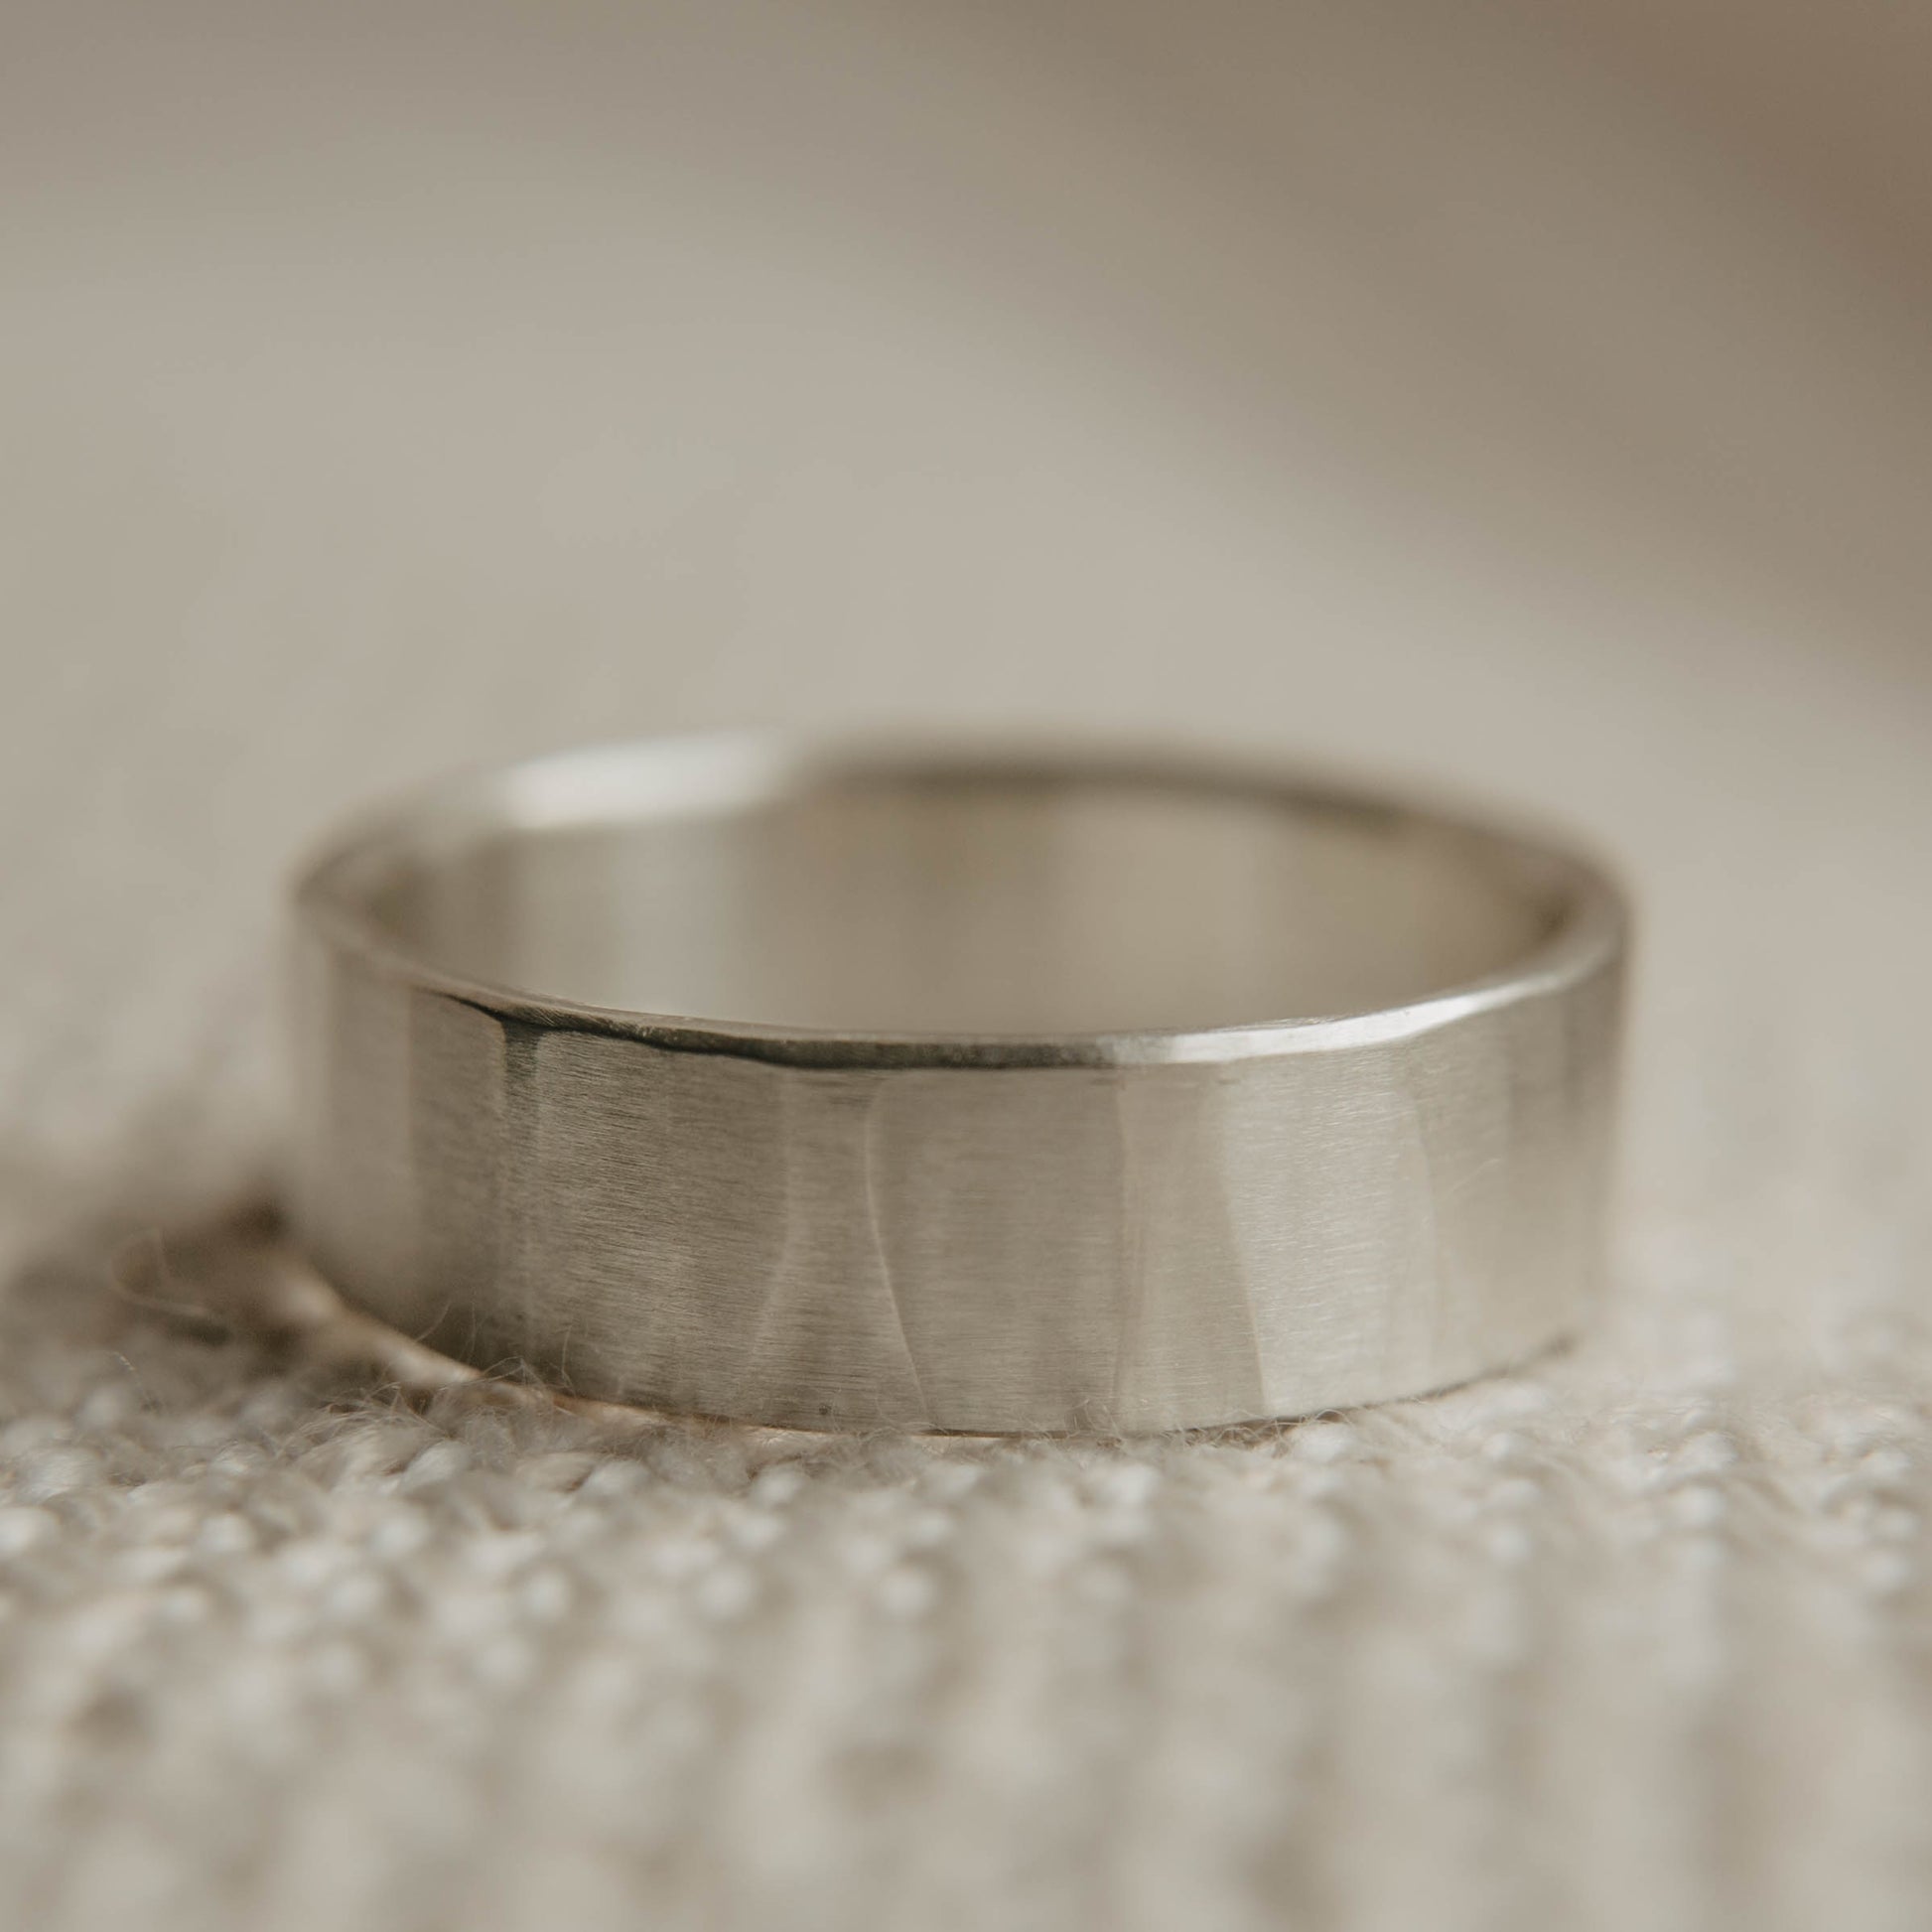 Mens sterling silver wedding band. This photo shows a lightly faceted silver ring (Horizontal with cloth backdrop)